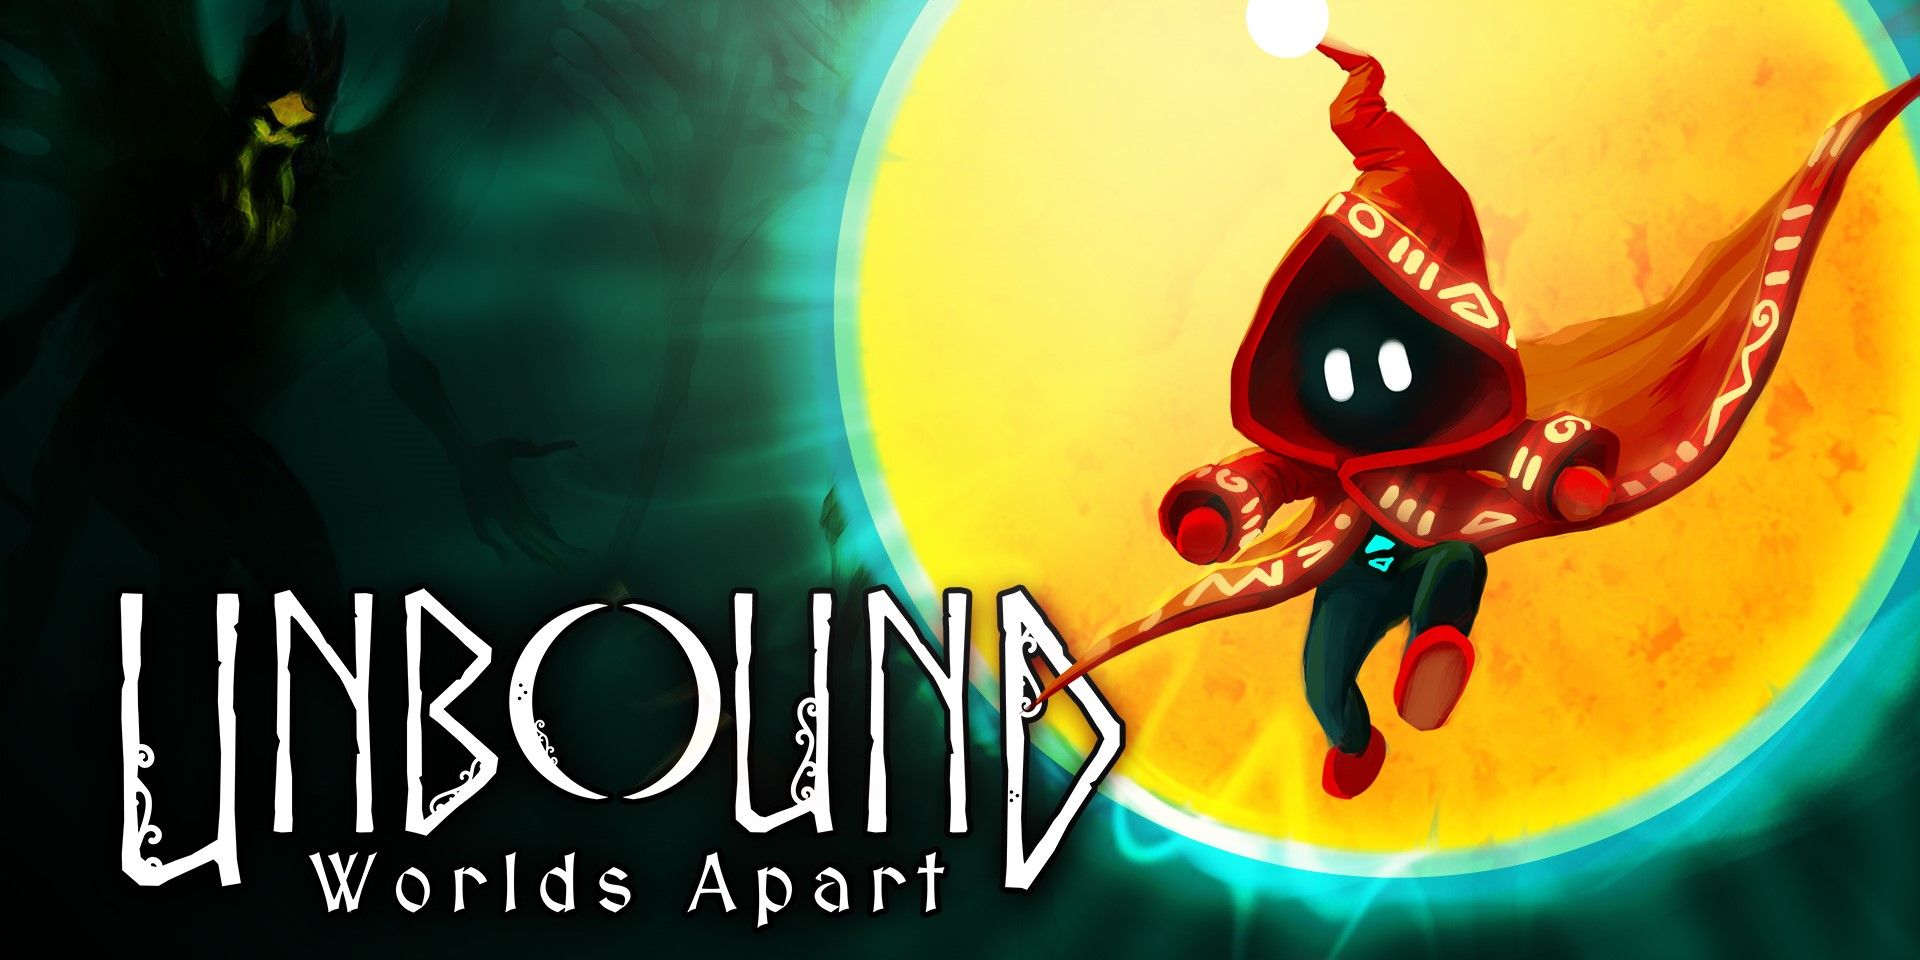 The title art for Unbound: Worlds Apart.